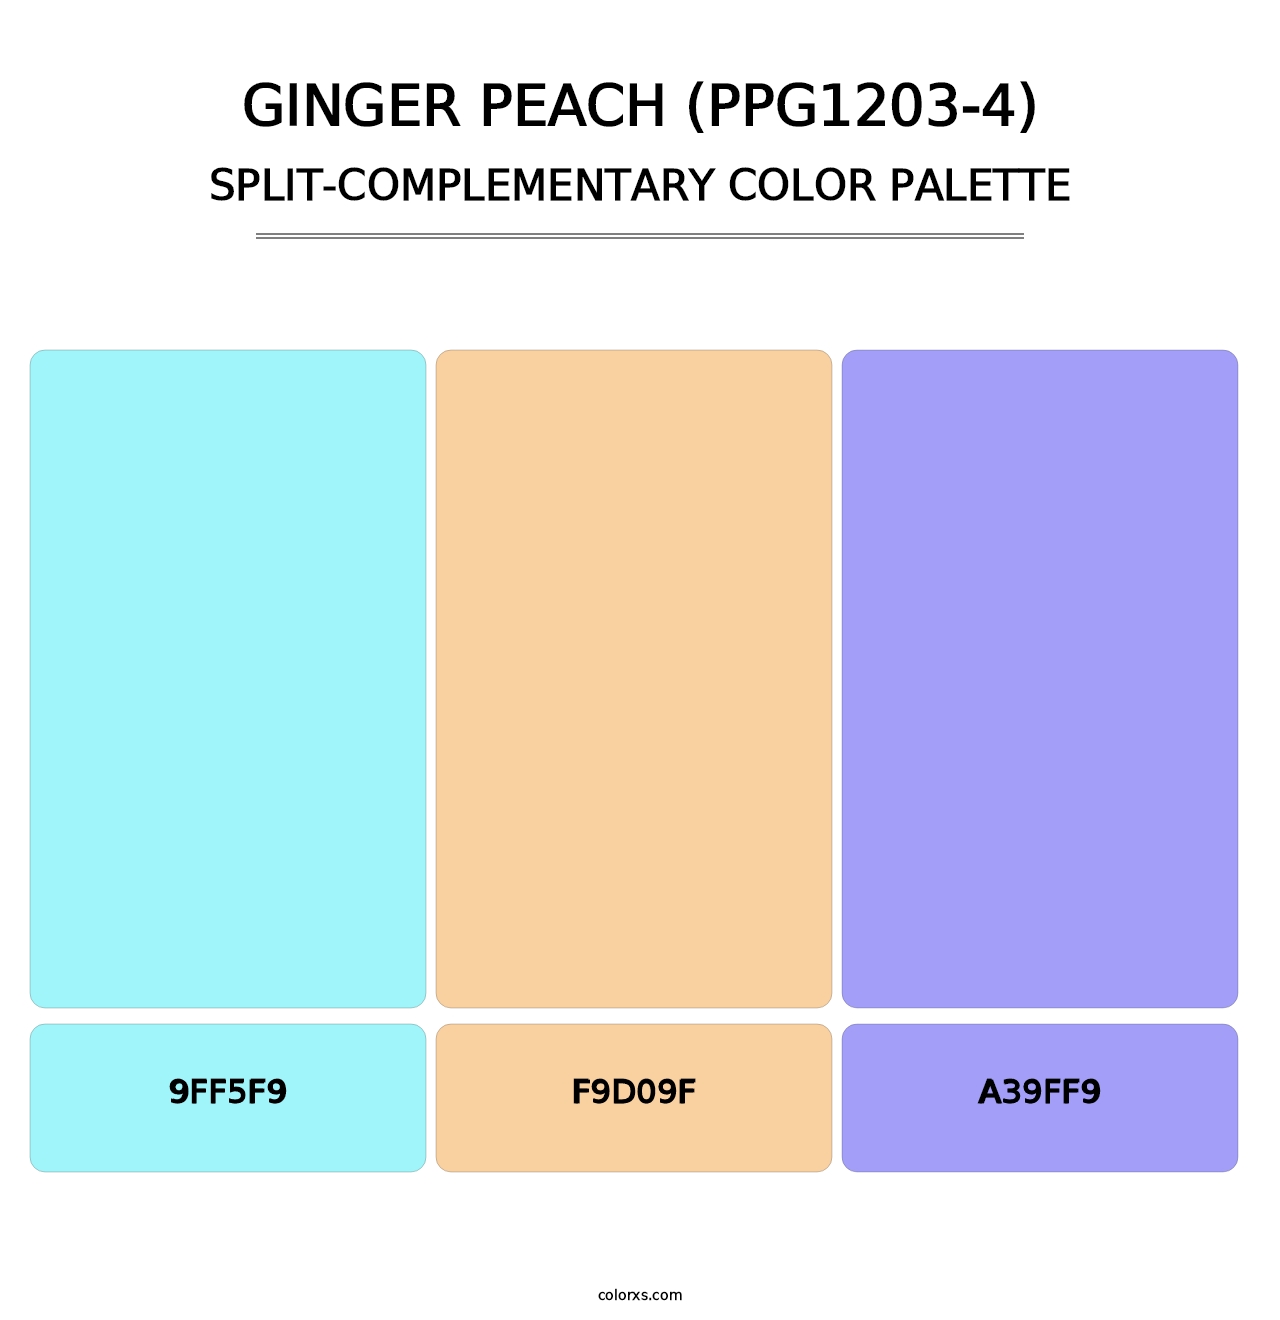 Ginger Peach (PPG1203-4) - Split-Complementary Color Palette